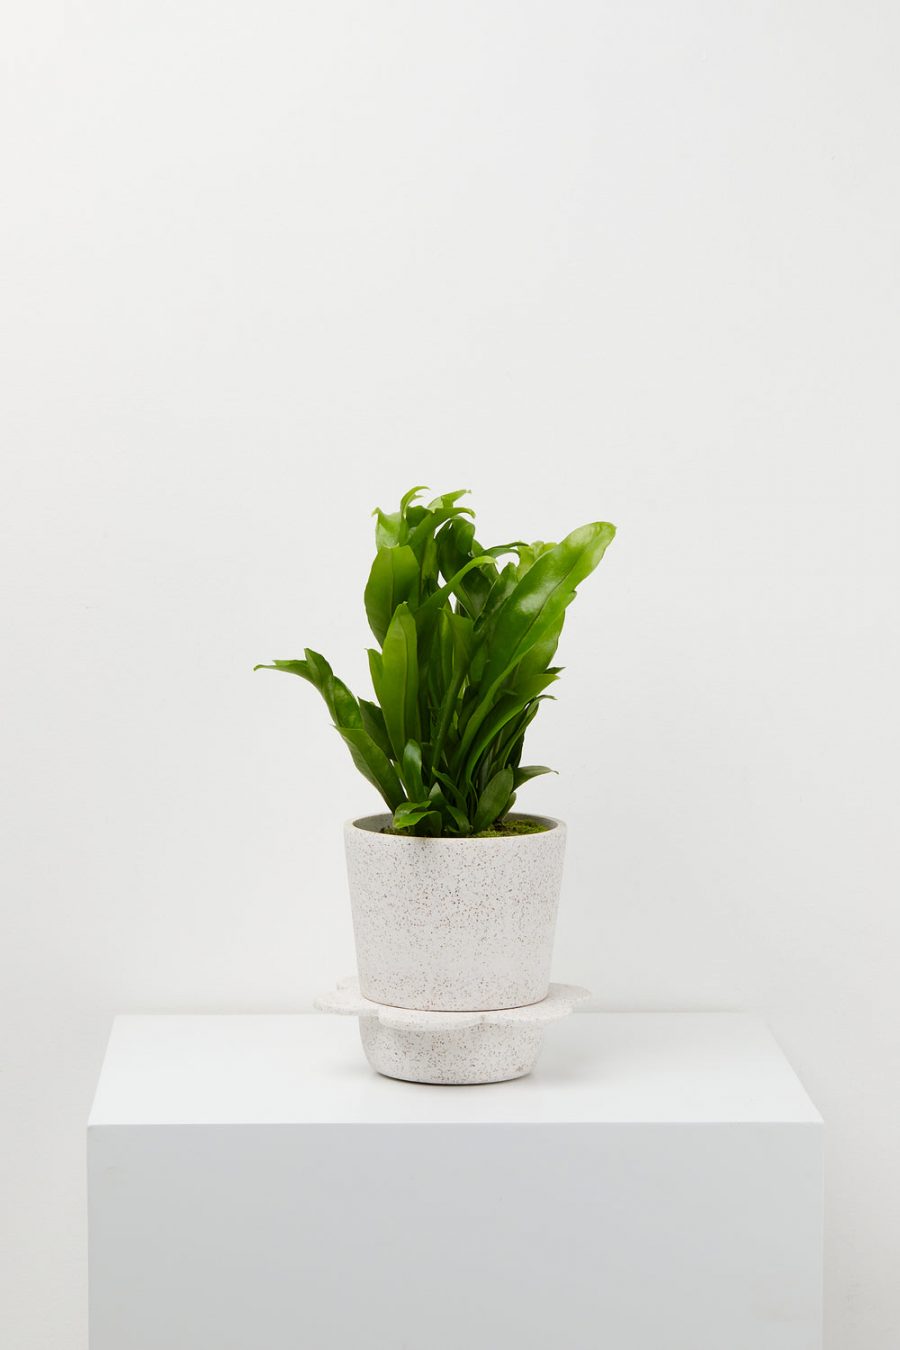 capra designs spring indoor pot white with agave speckle